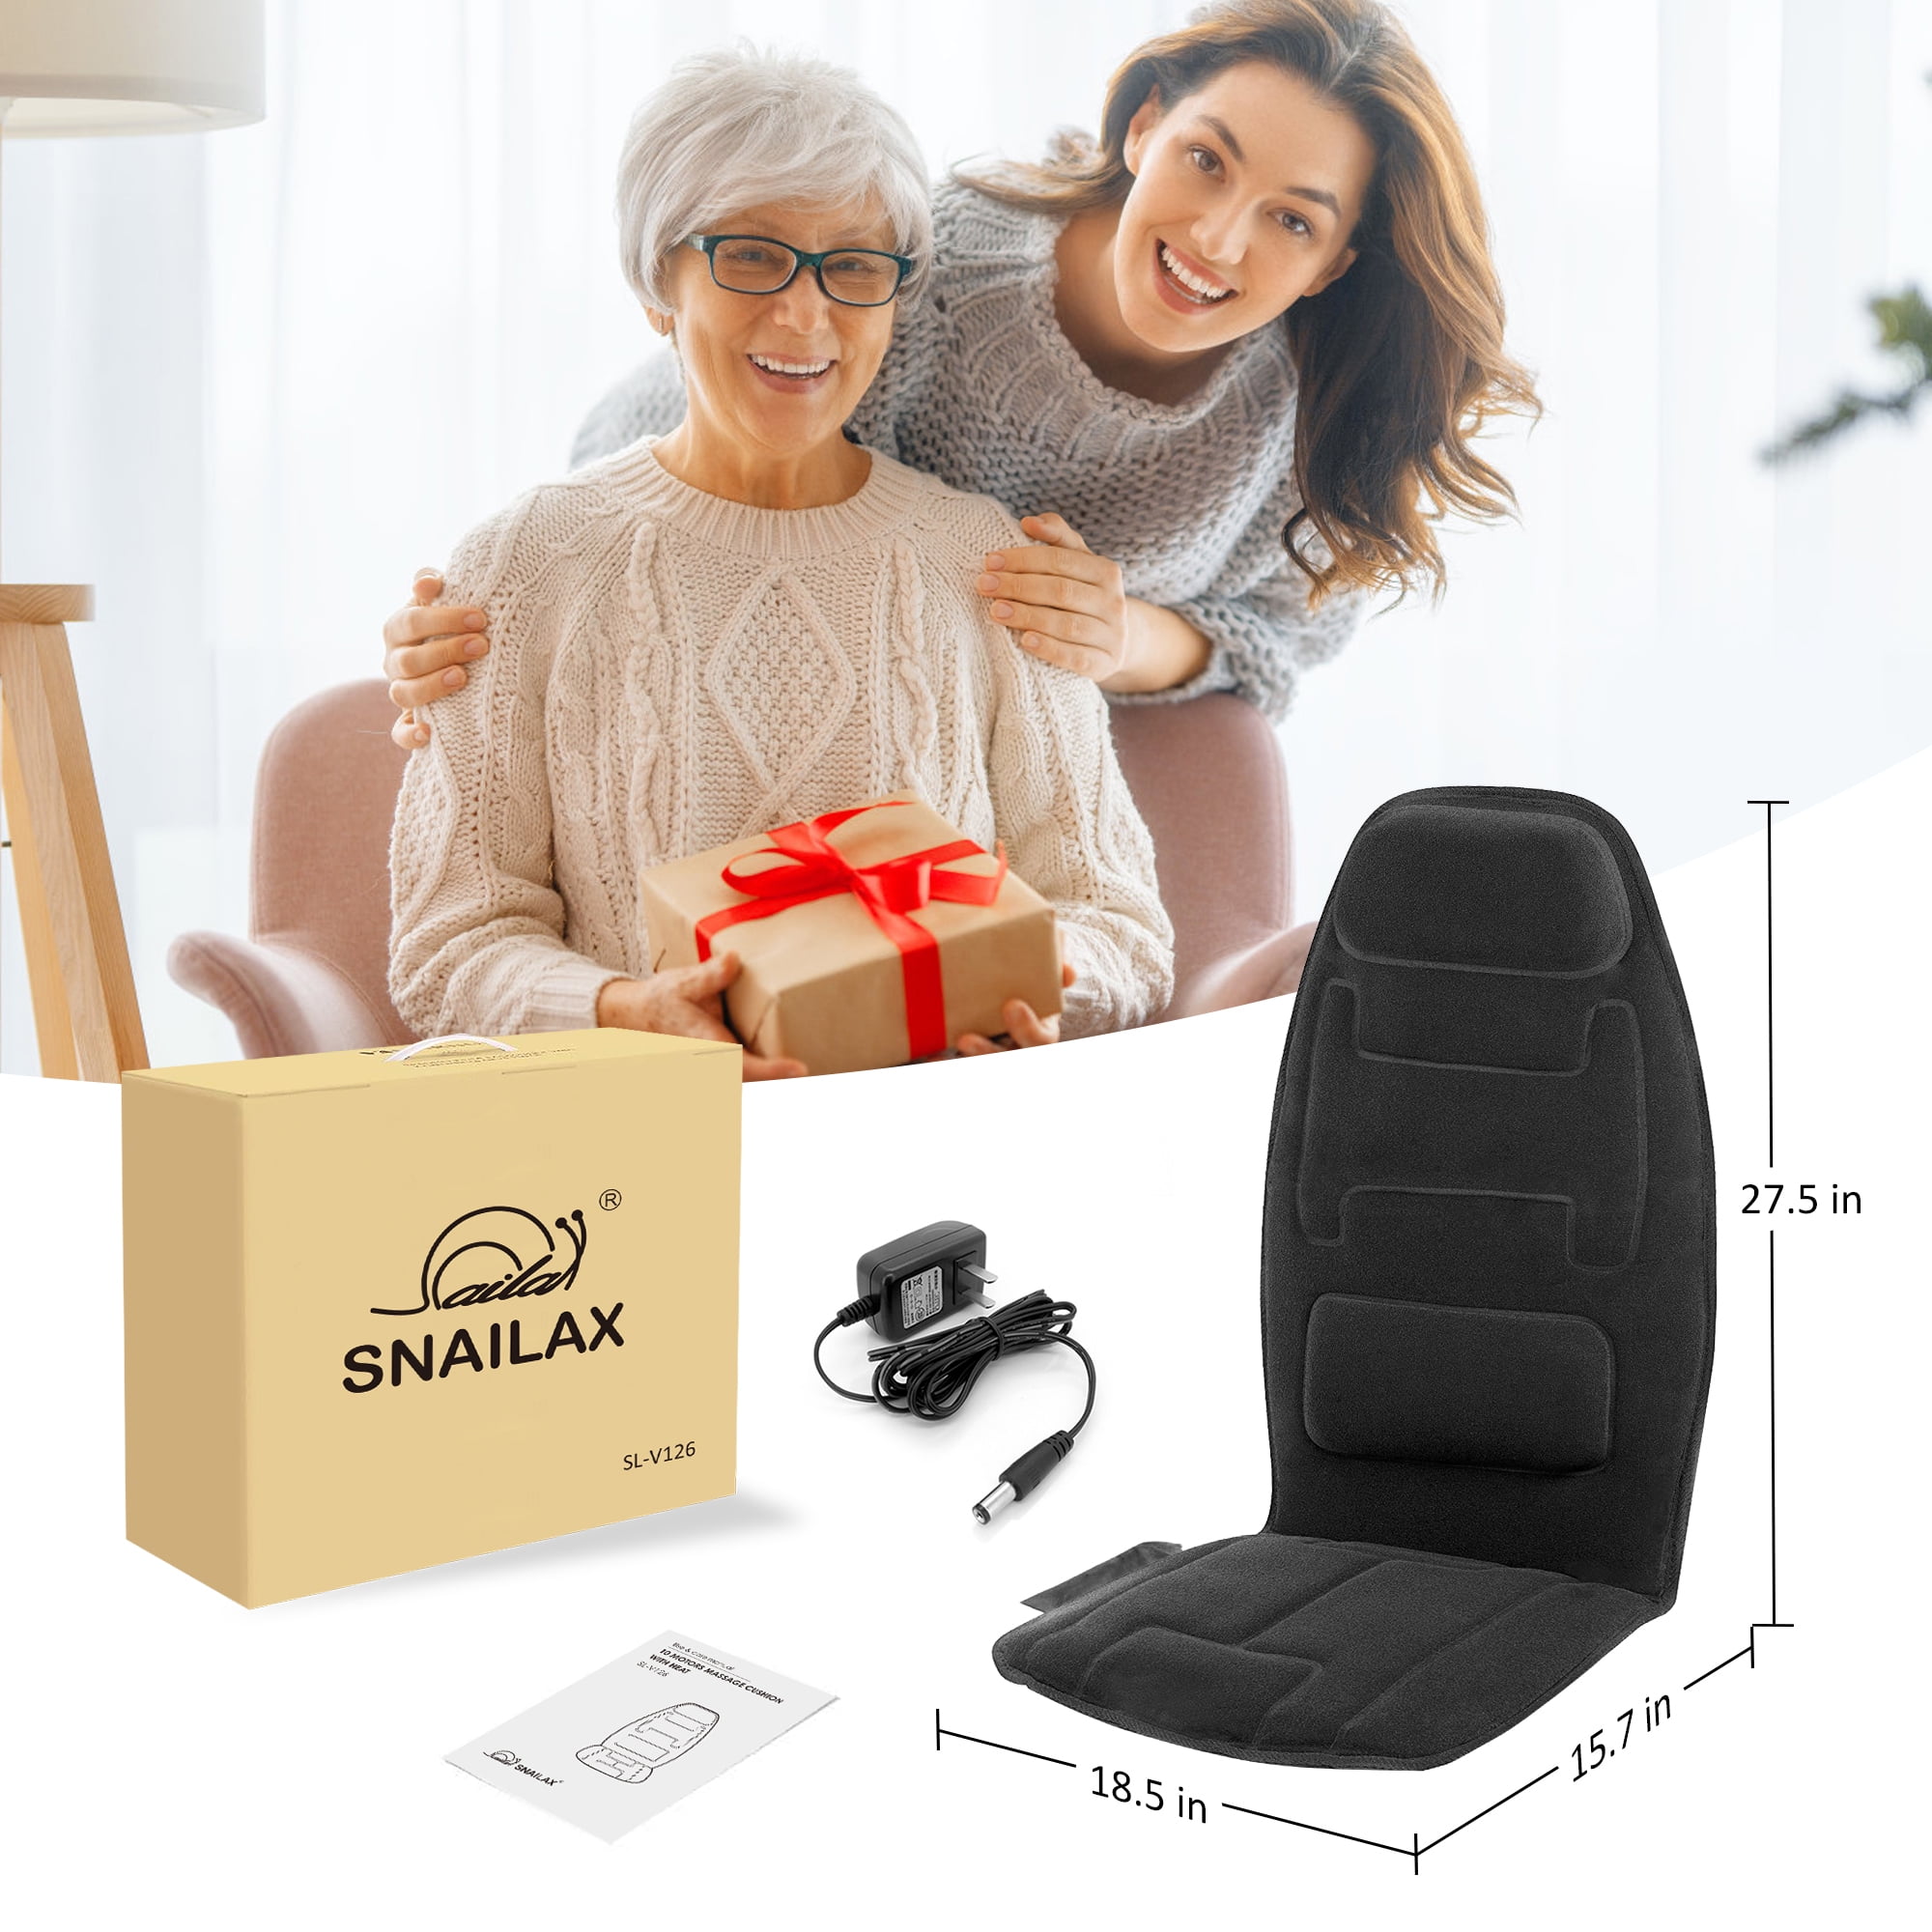 Snailax Vibration Back Massager with Heat, APP Control, Massage Seat  Cushion with Extra Memory Foam …See more Snailax Vibration Back Massager  with